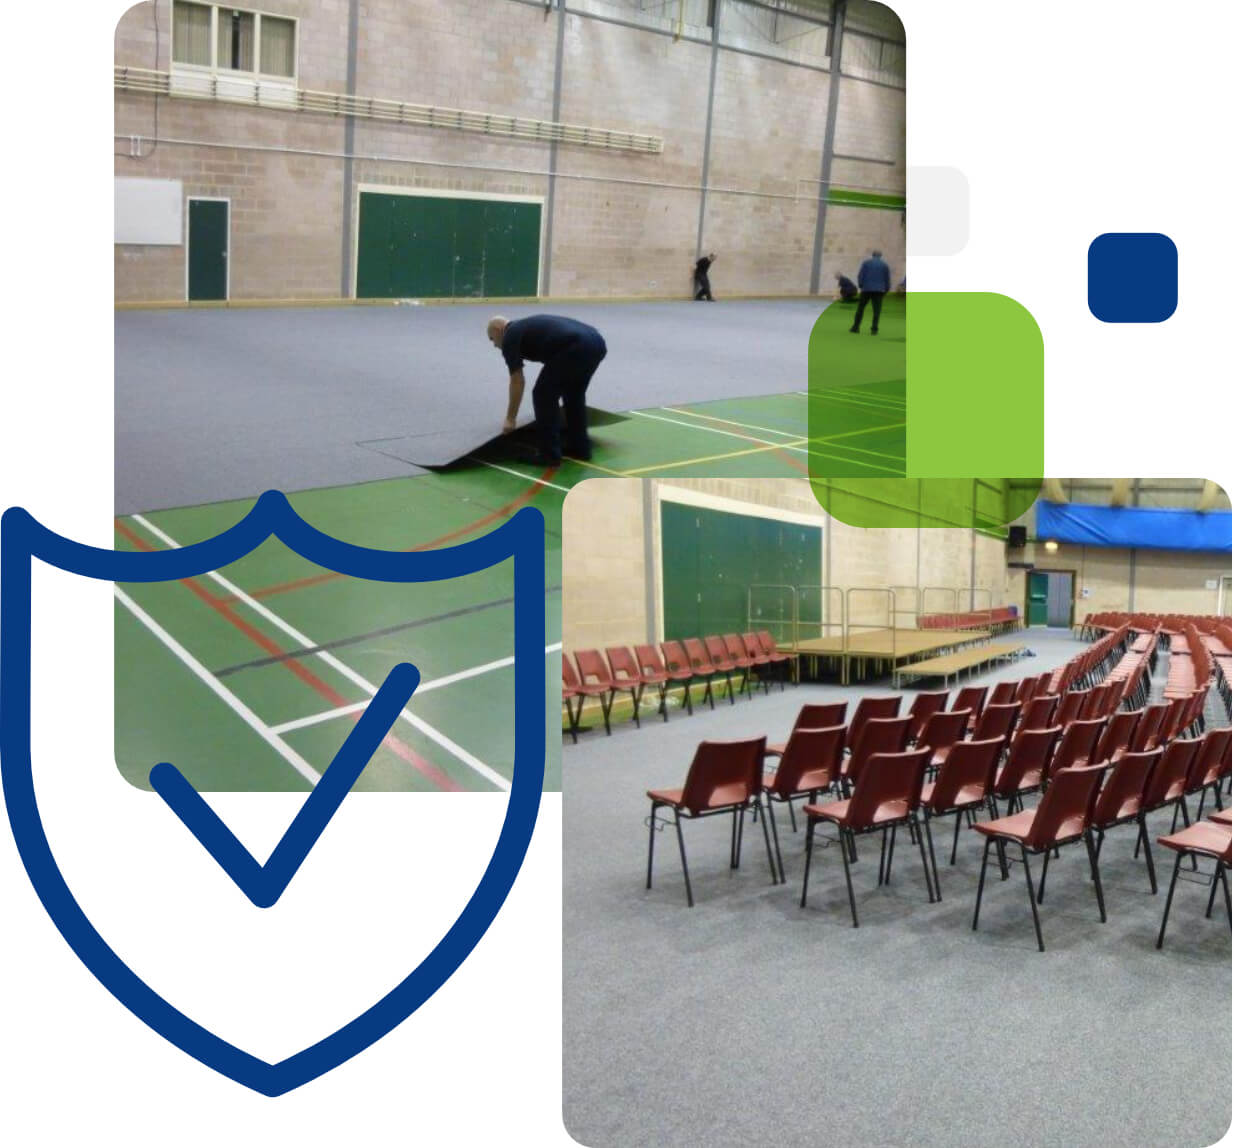 University event using floor protection by SmartSquare